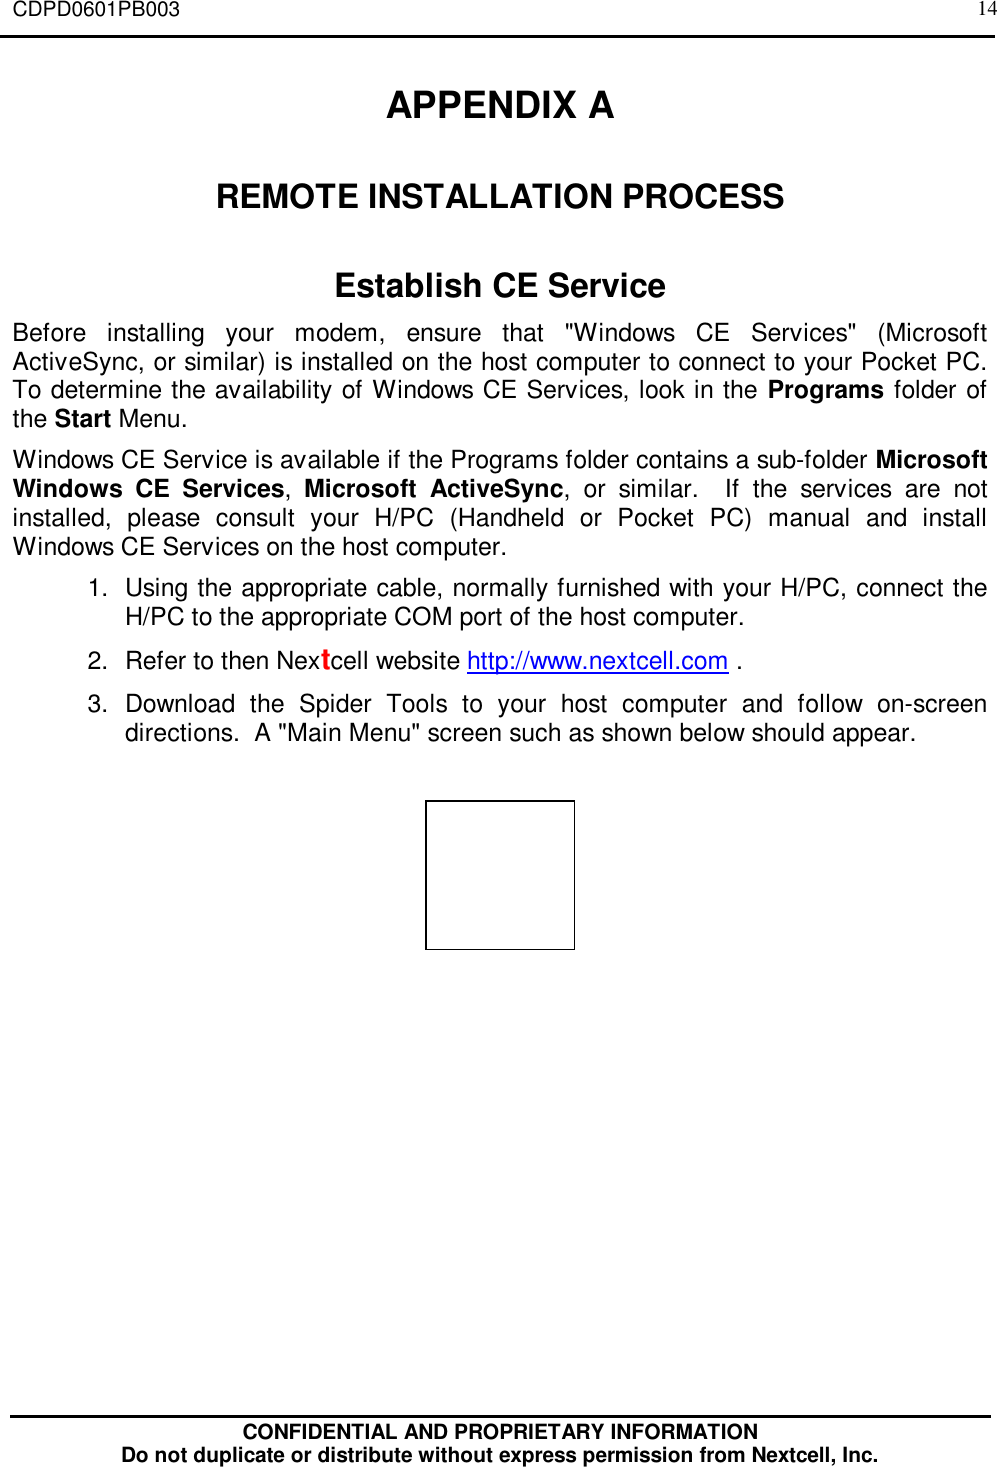 CDPD0601PB003CONFIDENTIAL AND PROPRIETARY INFORMATIONDo not duplicate or distribute without express permission from Nextcell, Inc.14APPENDIX AREMOTE INSTALLATION PROCESSEstablish CE ServiceBefore installing your modem, ensure that &quot;Windows CE Services&quot; (MicrosoftActiveSync, or similar) is installed on the host computer to connect to your Pocket PC.To determine the availability of Windows CE Services, look in the Programs folder ofthe Start Menu.Windows CE Service is available if the Programs folder contains a sub-folder MicrosoftWindows CE Services,  Microsoft ActiveSync, or similar.  If the services are notinstalled, please consult your H/PC (Handheld or Pocket PC) manual and installWindows CE Services on the host computer.1. Using the appropriate cable, normally furnished with your H/PC, connect theH/PC to the appropriate COM port of the host computer.2. Refer to then Nextcell website http://www.nextcell.com .3. Download the Spider Tools to your host computer and follow on-screendirections.  A &quot;Main Menu&quot; screen such as shown below should appear.